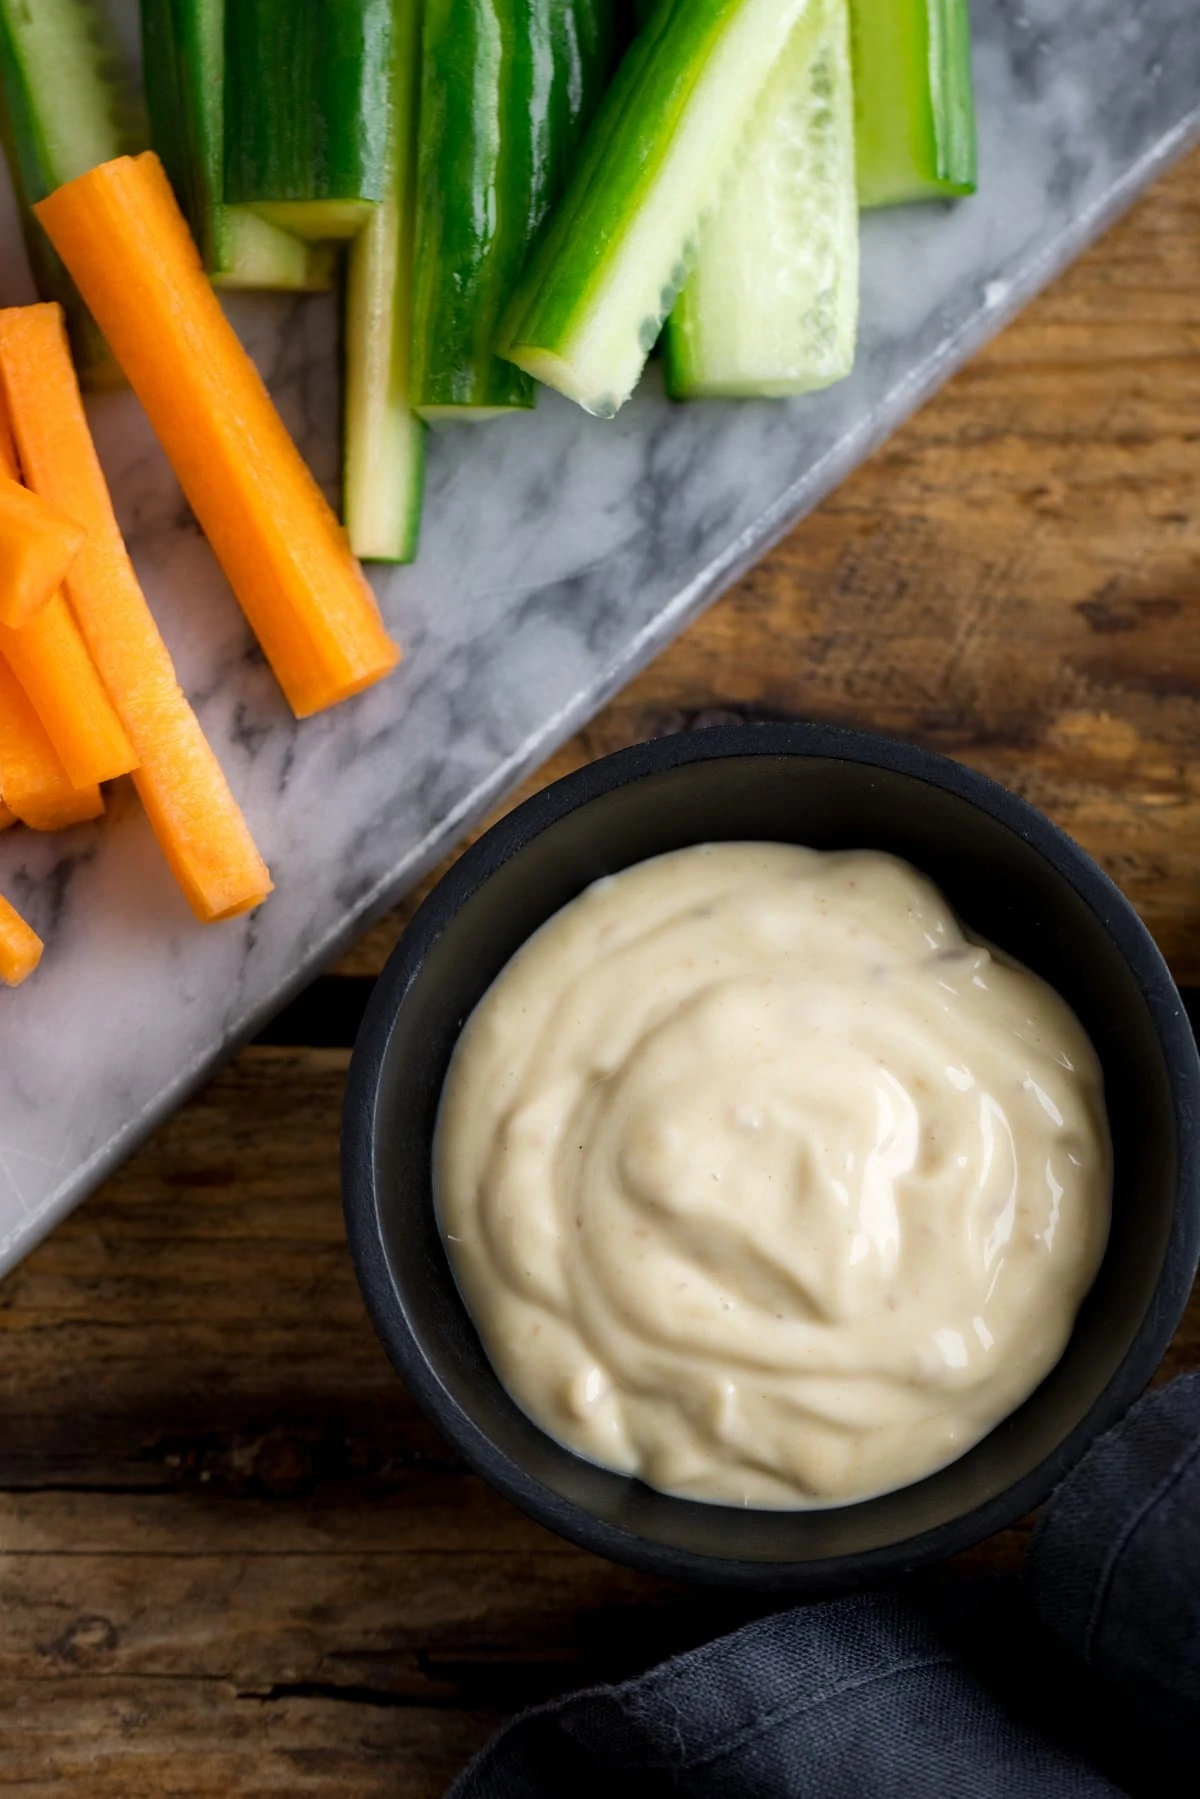 Overhead image of a small black bowl filled with salad cream next to carrot and cucumber pieces.